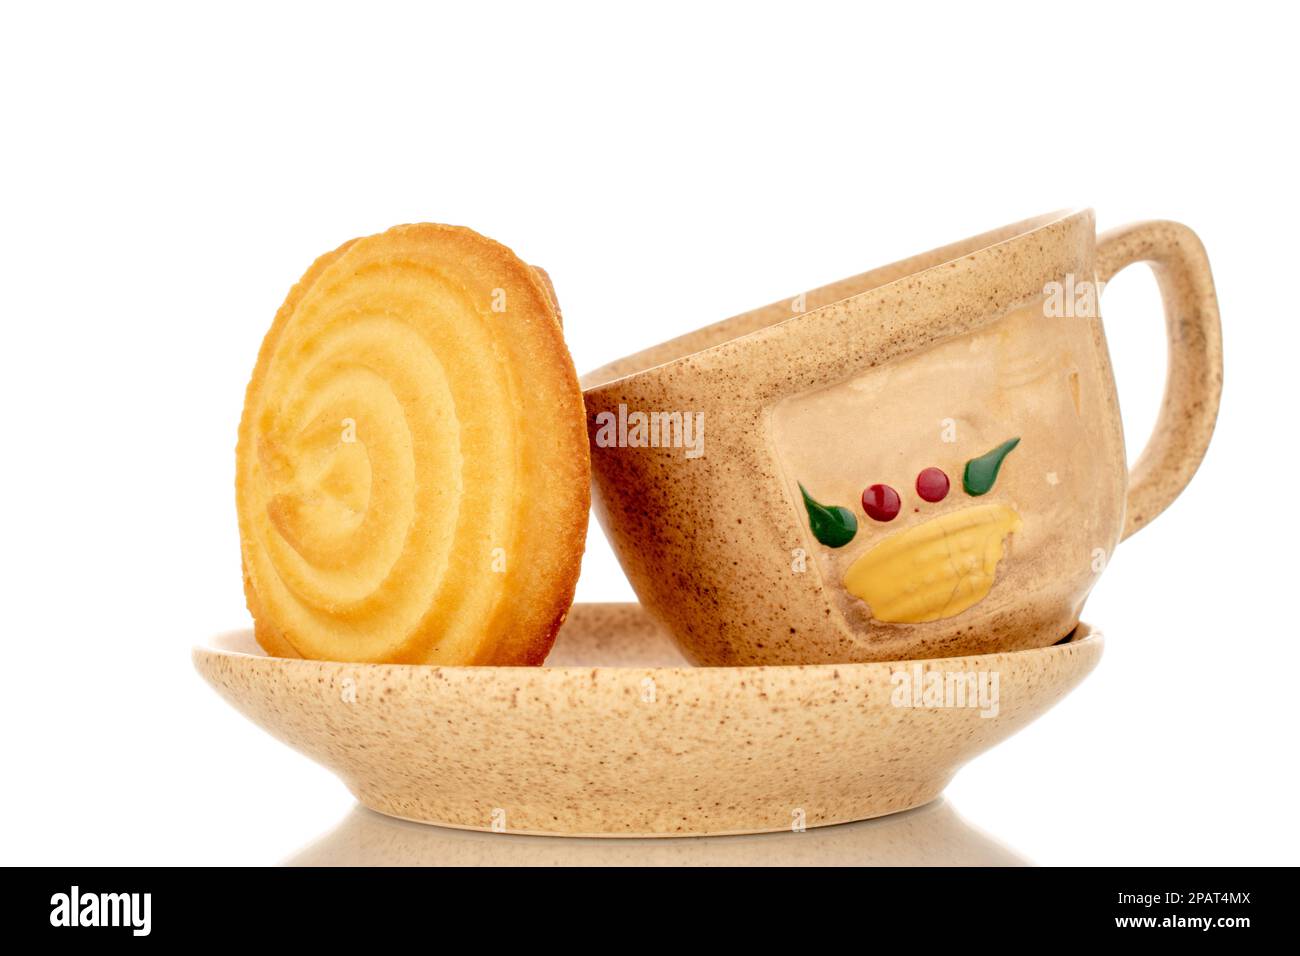 One sweet cookie on a ceramic saucer with a cup, macro, isolated on white background. Stock Photo